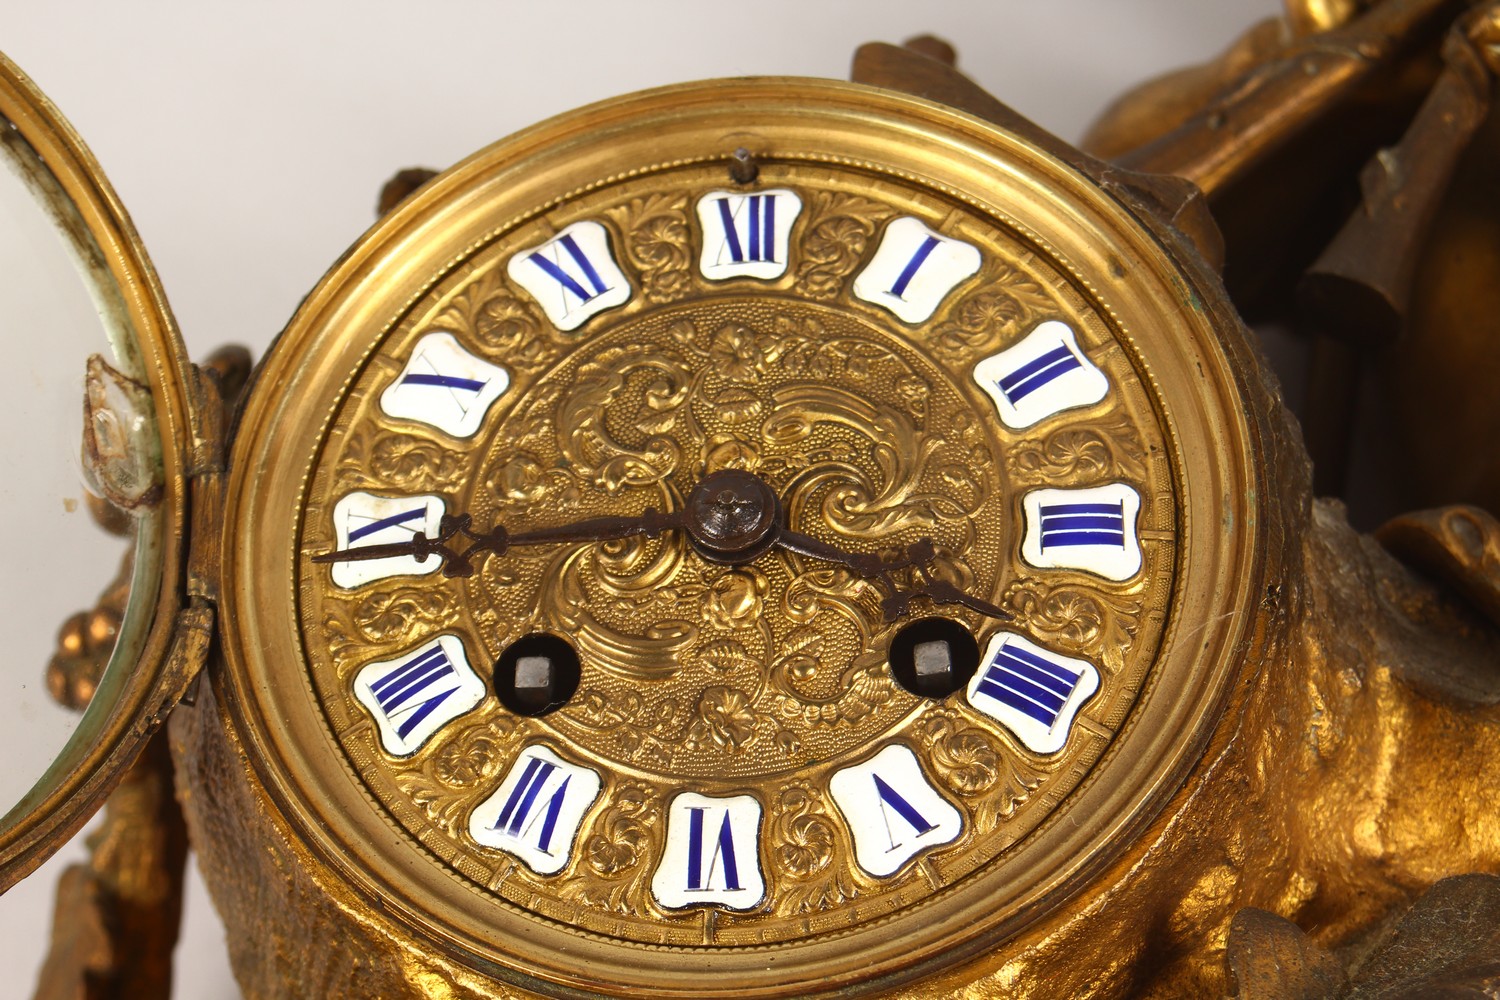 A 19TH CENTURY FRENCH ORMOLU MANTLE CLOCK, with eight-day movement striking on a bell, enamelled - Image 11 of 14